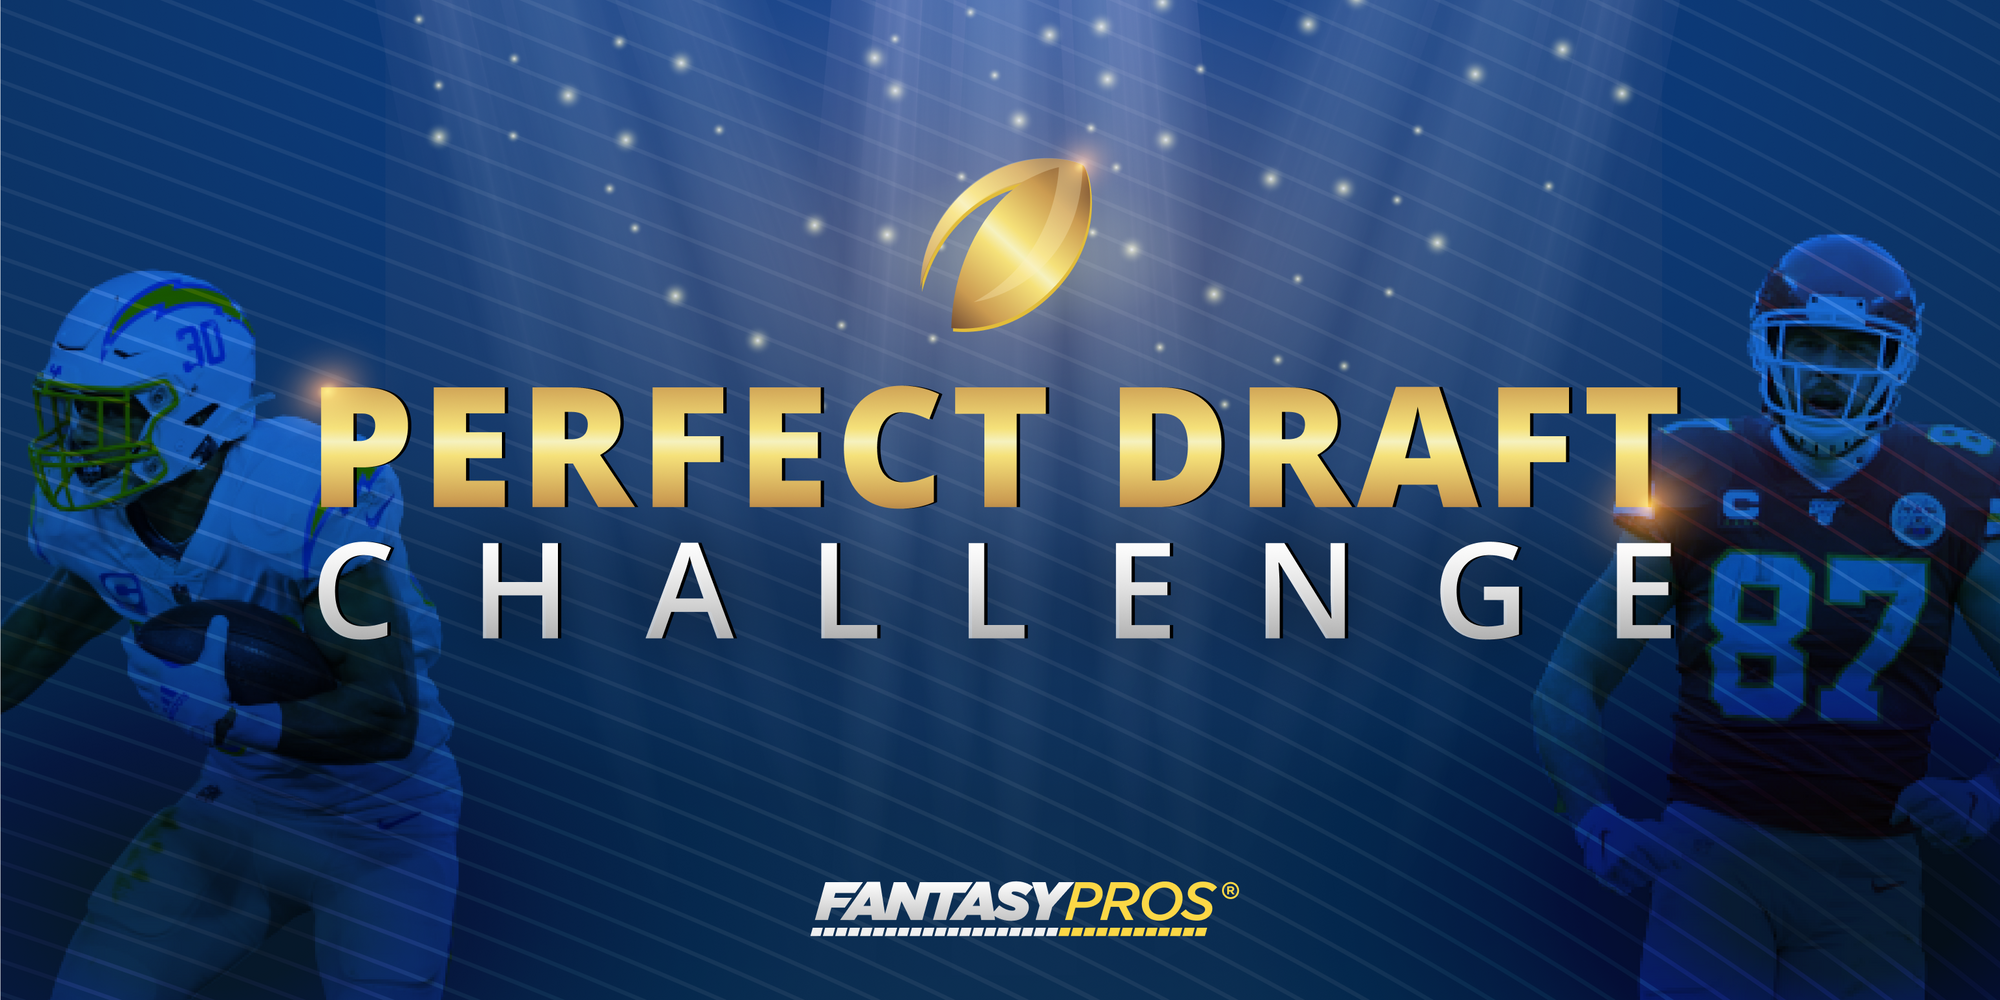 The 2022 Perfect Draft Challenge Has Arrived!